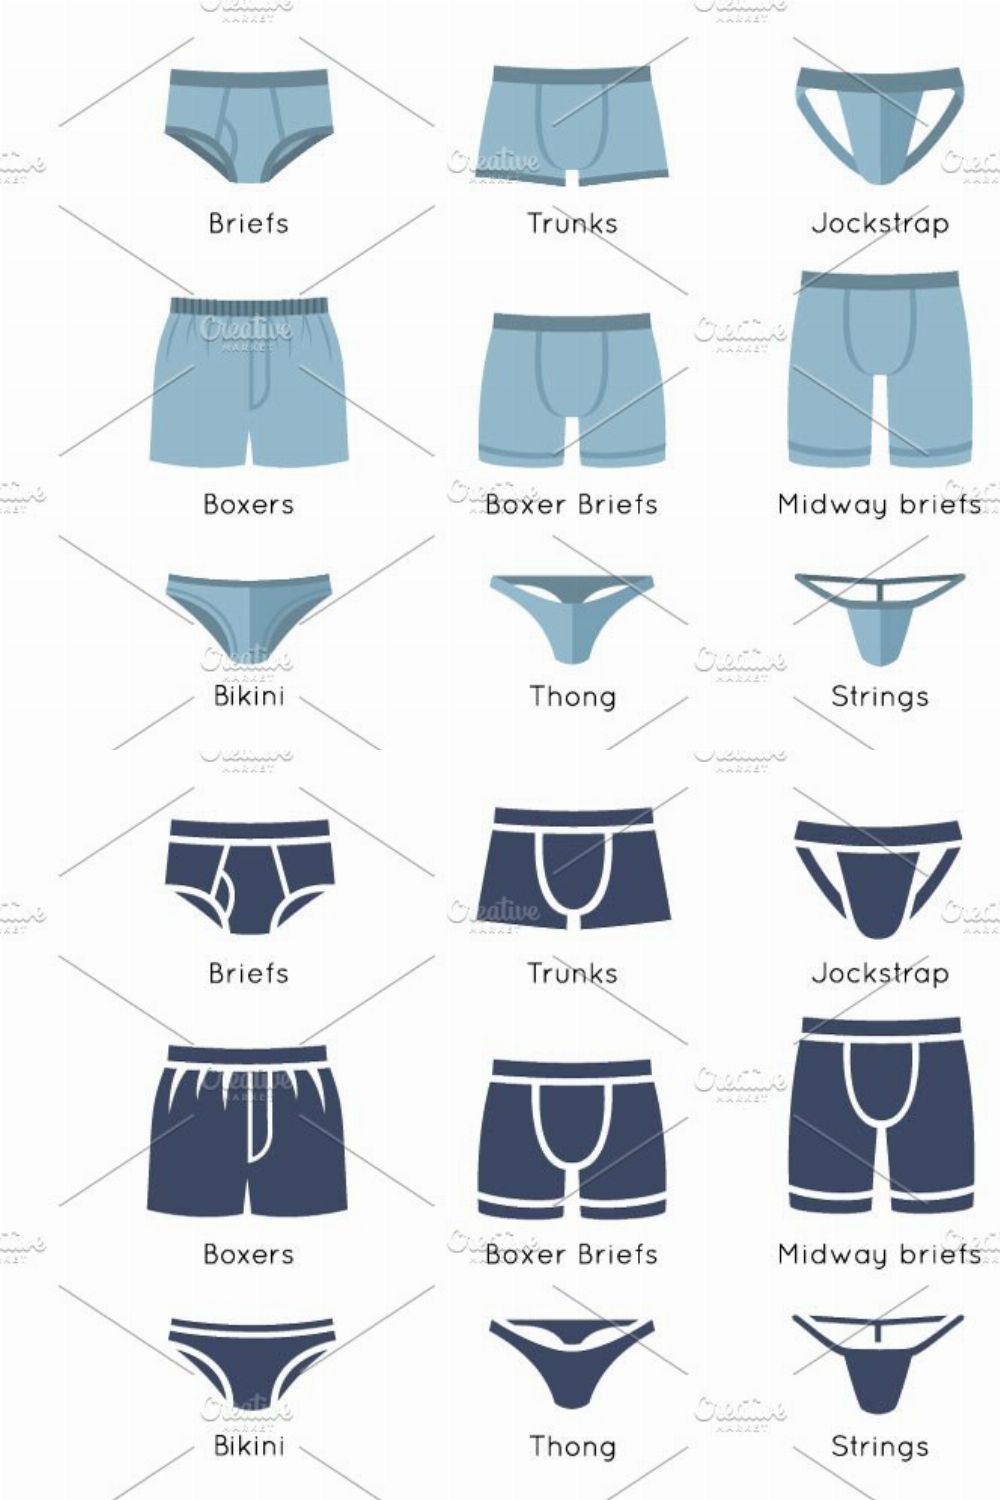 Male underwear types flat icons set pinterest preview image.